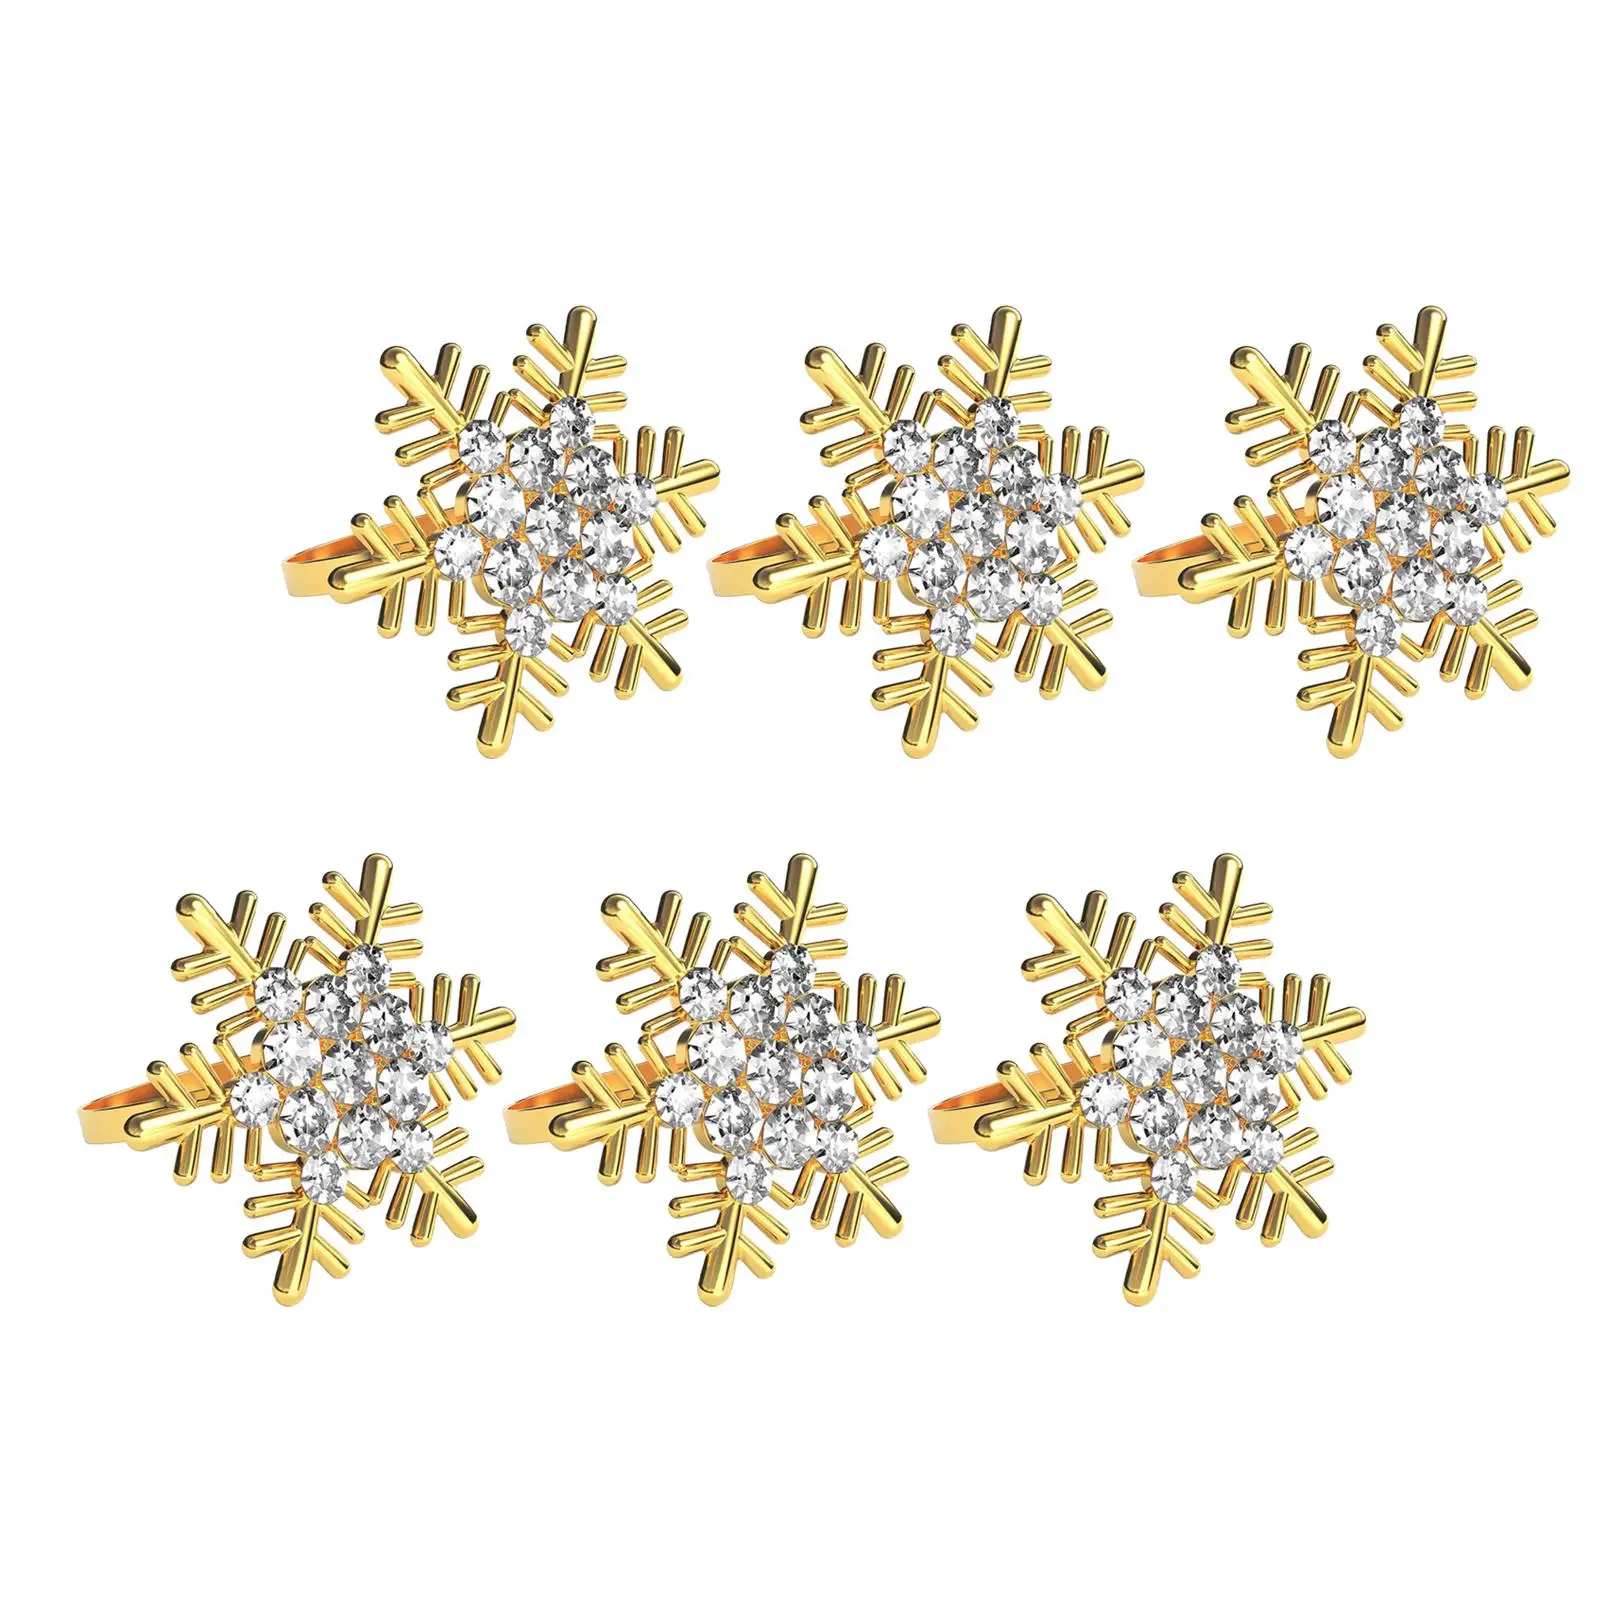 6x Snowflake Napkin Rings Chic Rhinestone Modern Napkin Buckle Napkin Holders for Thanksgiving Party Banquet Christmas Hotel